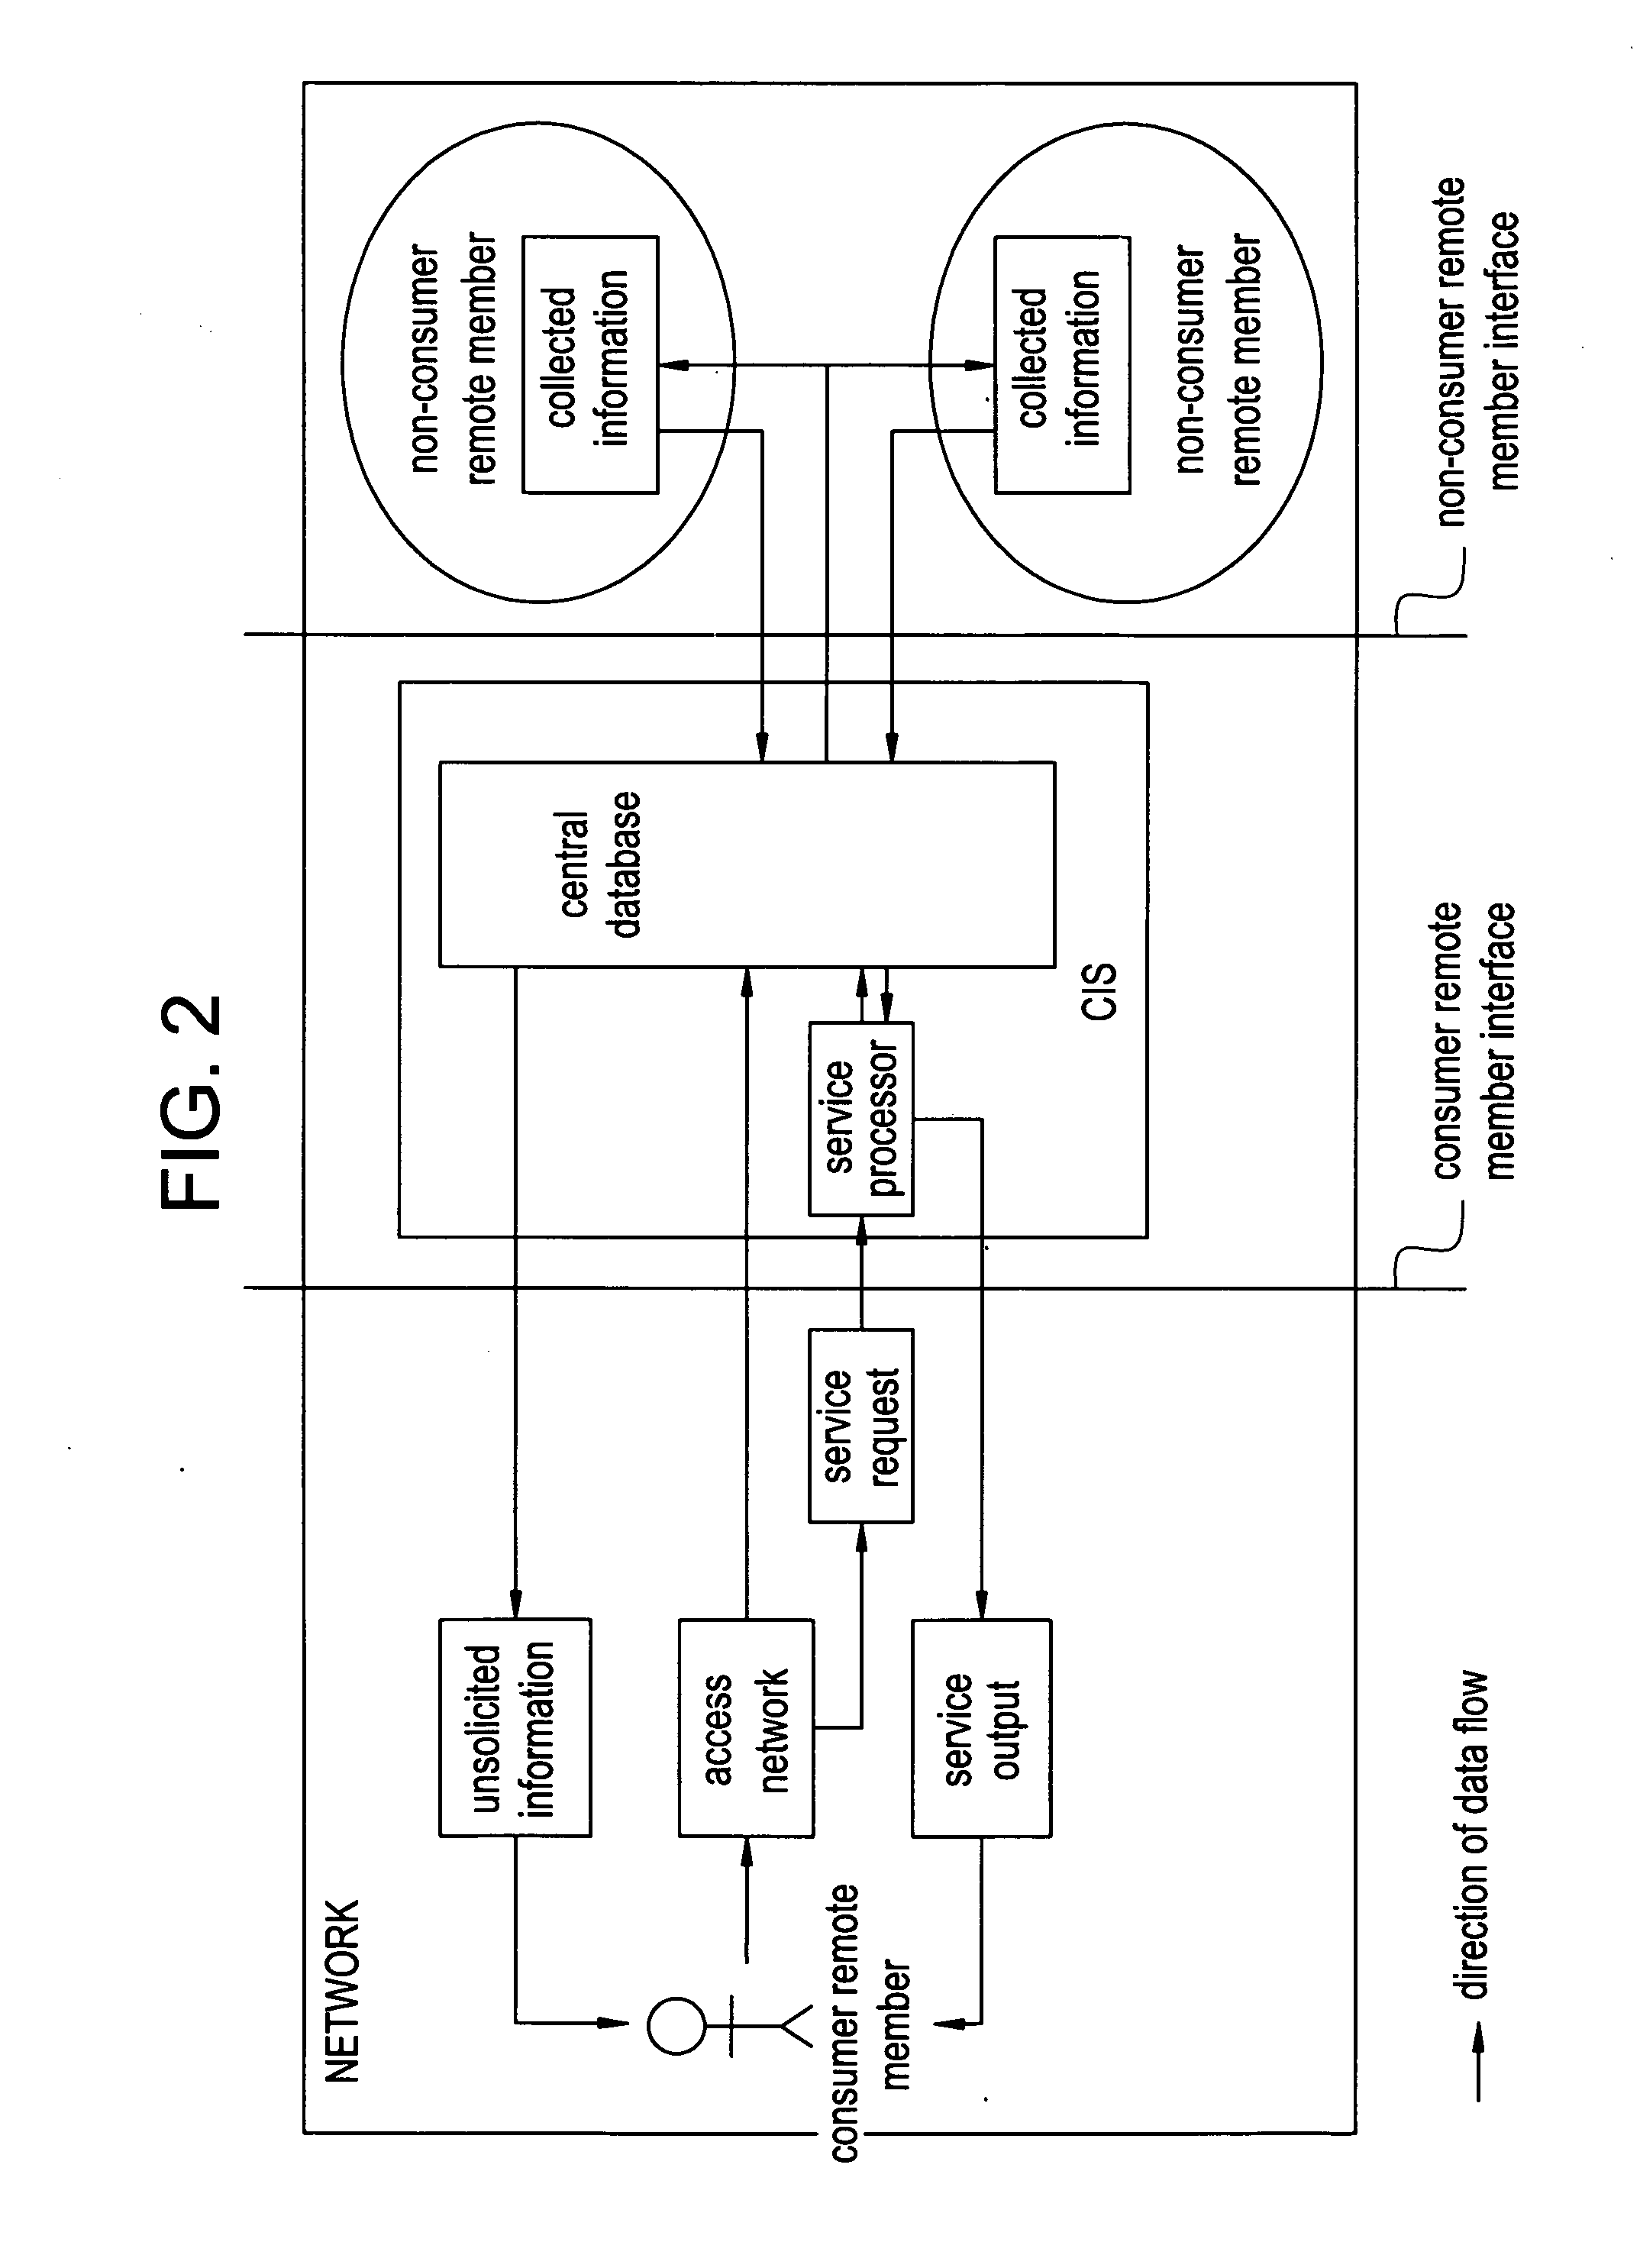 Network and methods for integrating individualized clinical test results and nutritional treatment